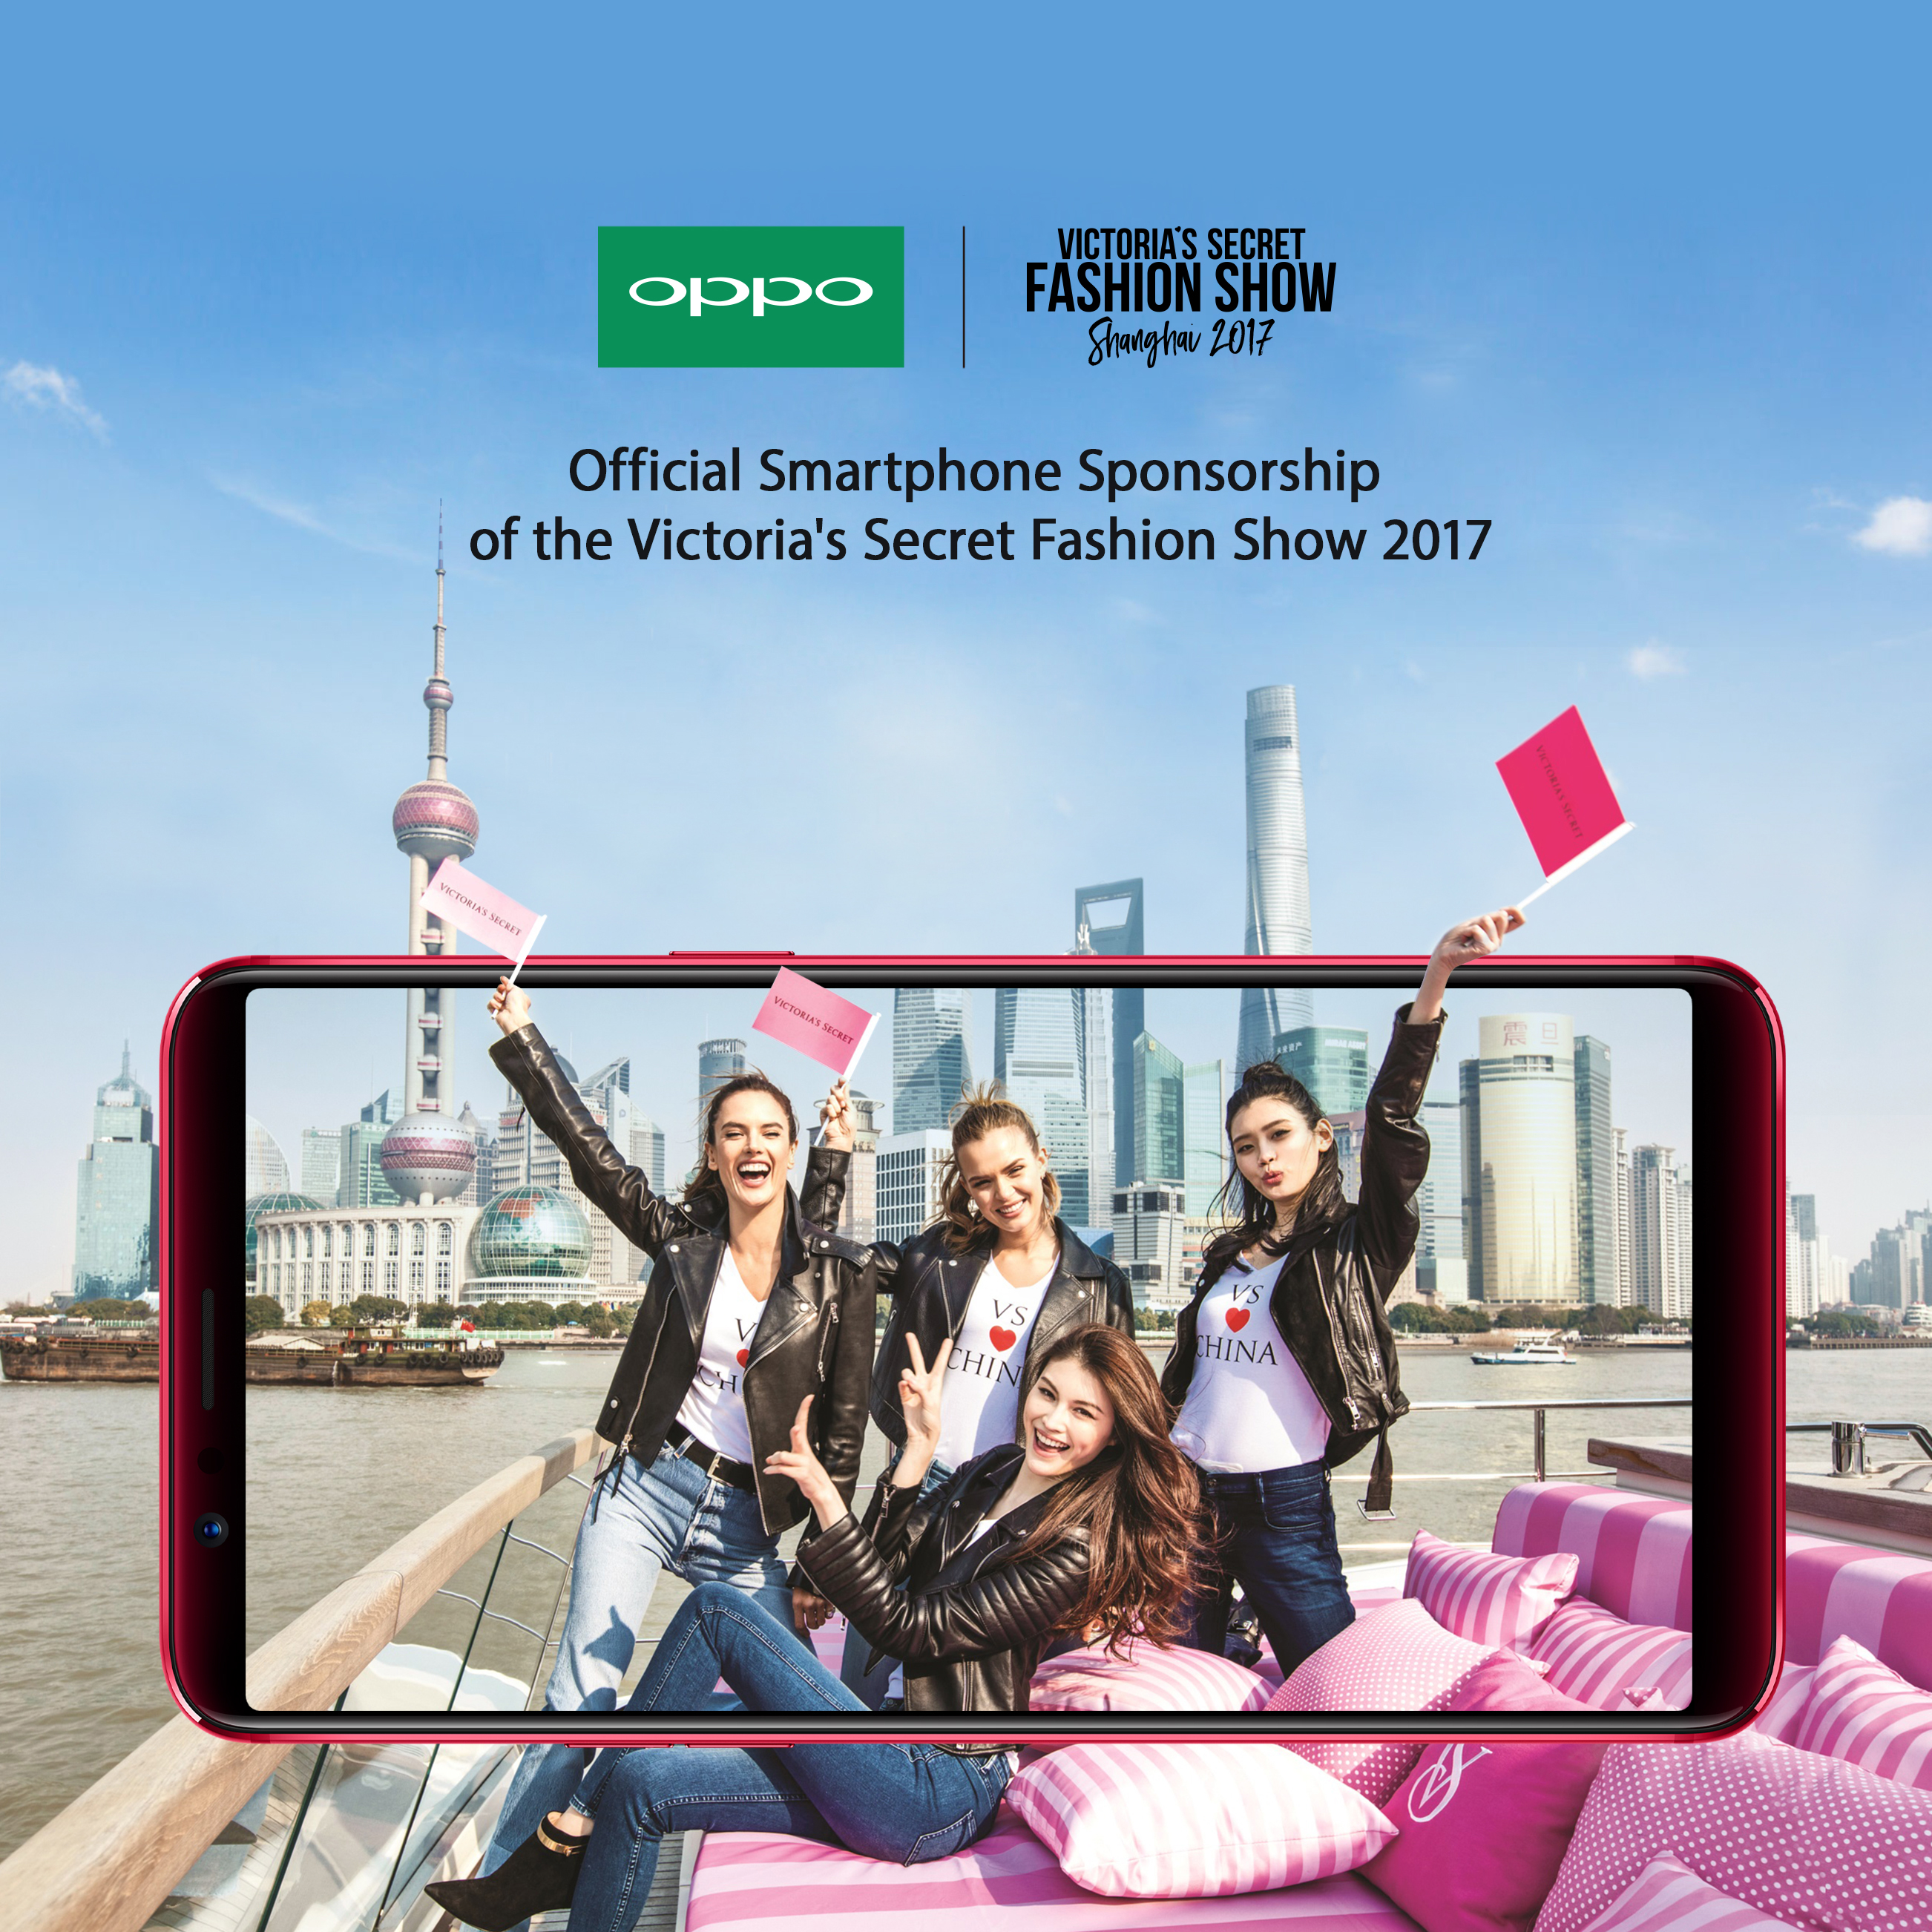 OPPO Officially Announces Partnership with Victoria’s Secret Fashion Show 2017